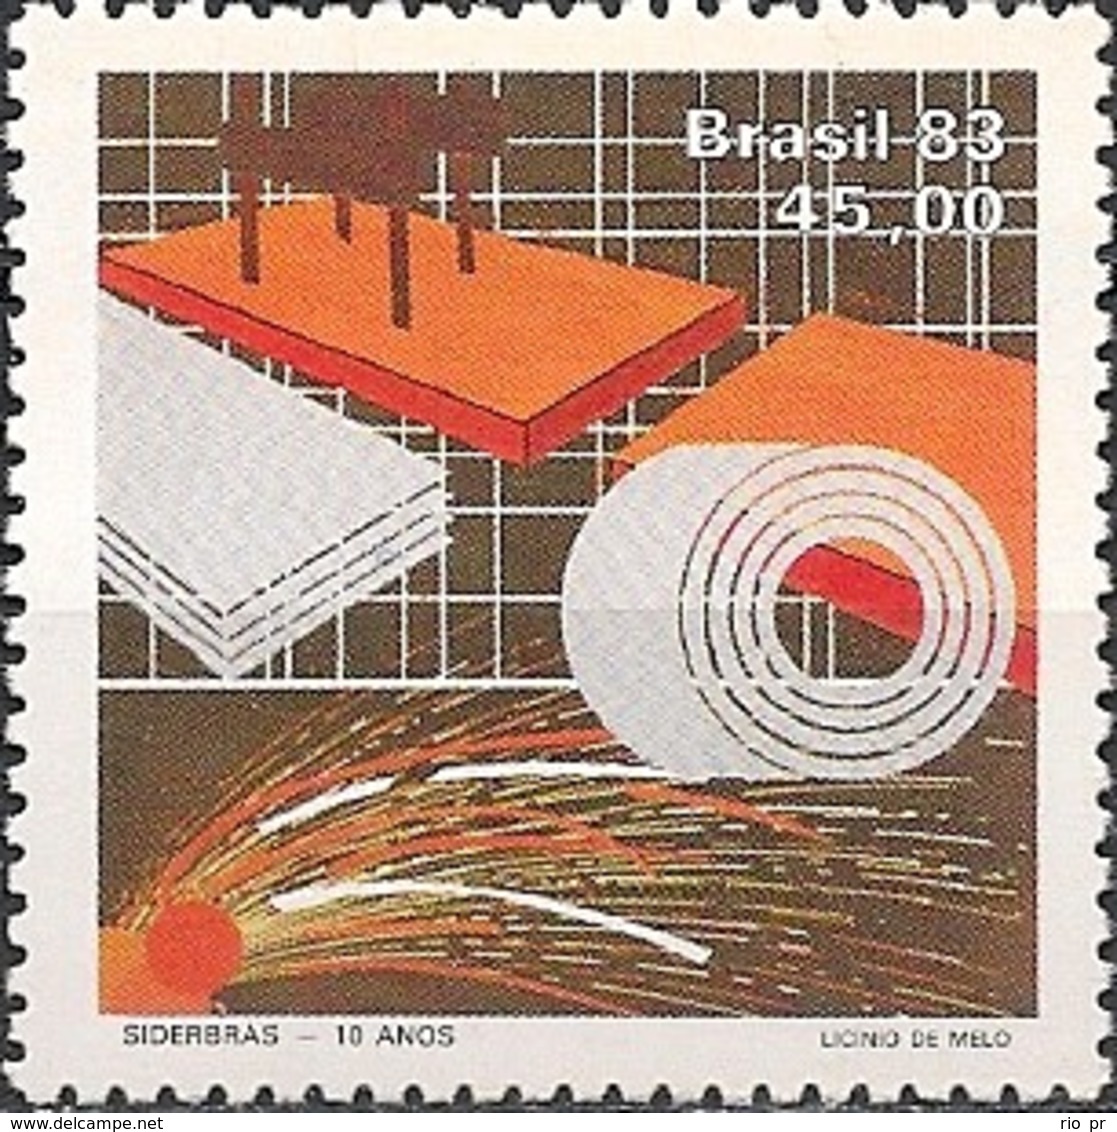 BRAZIL - NATIONAL STEEL CORPORATION (SIDERBRÁS), 10th ANNIVERSARY 1983 - MNH - Unused Stamps